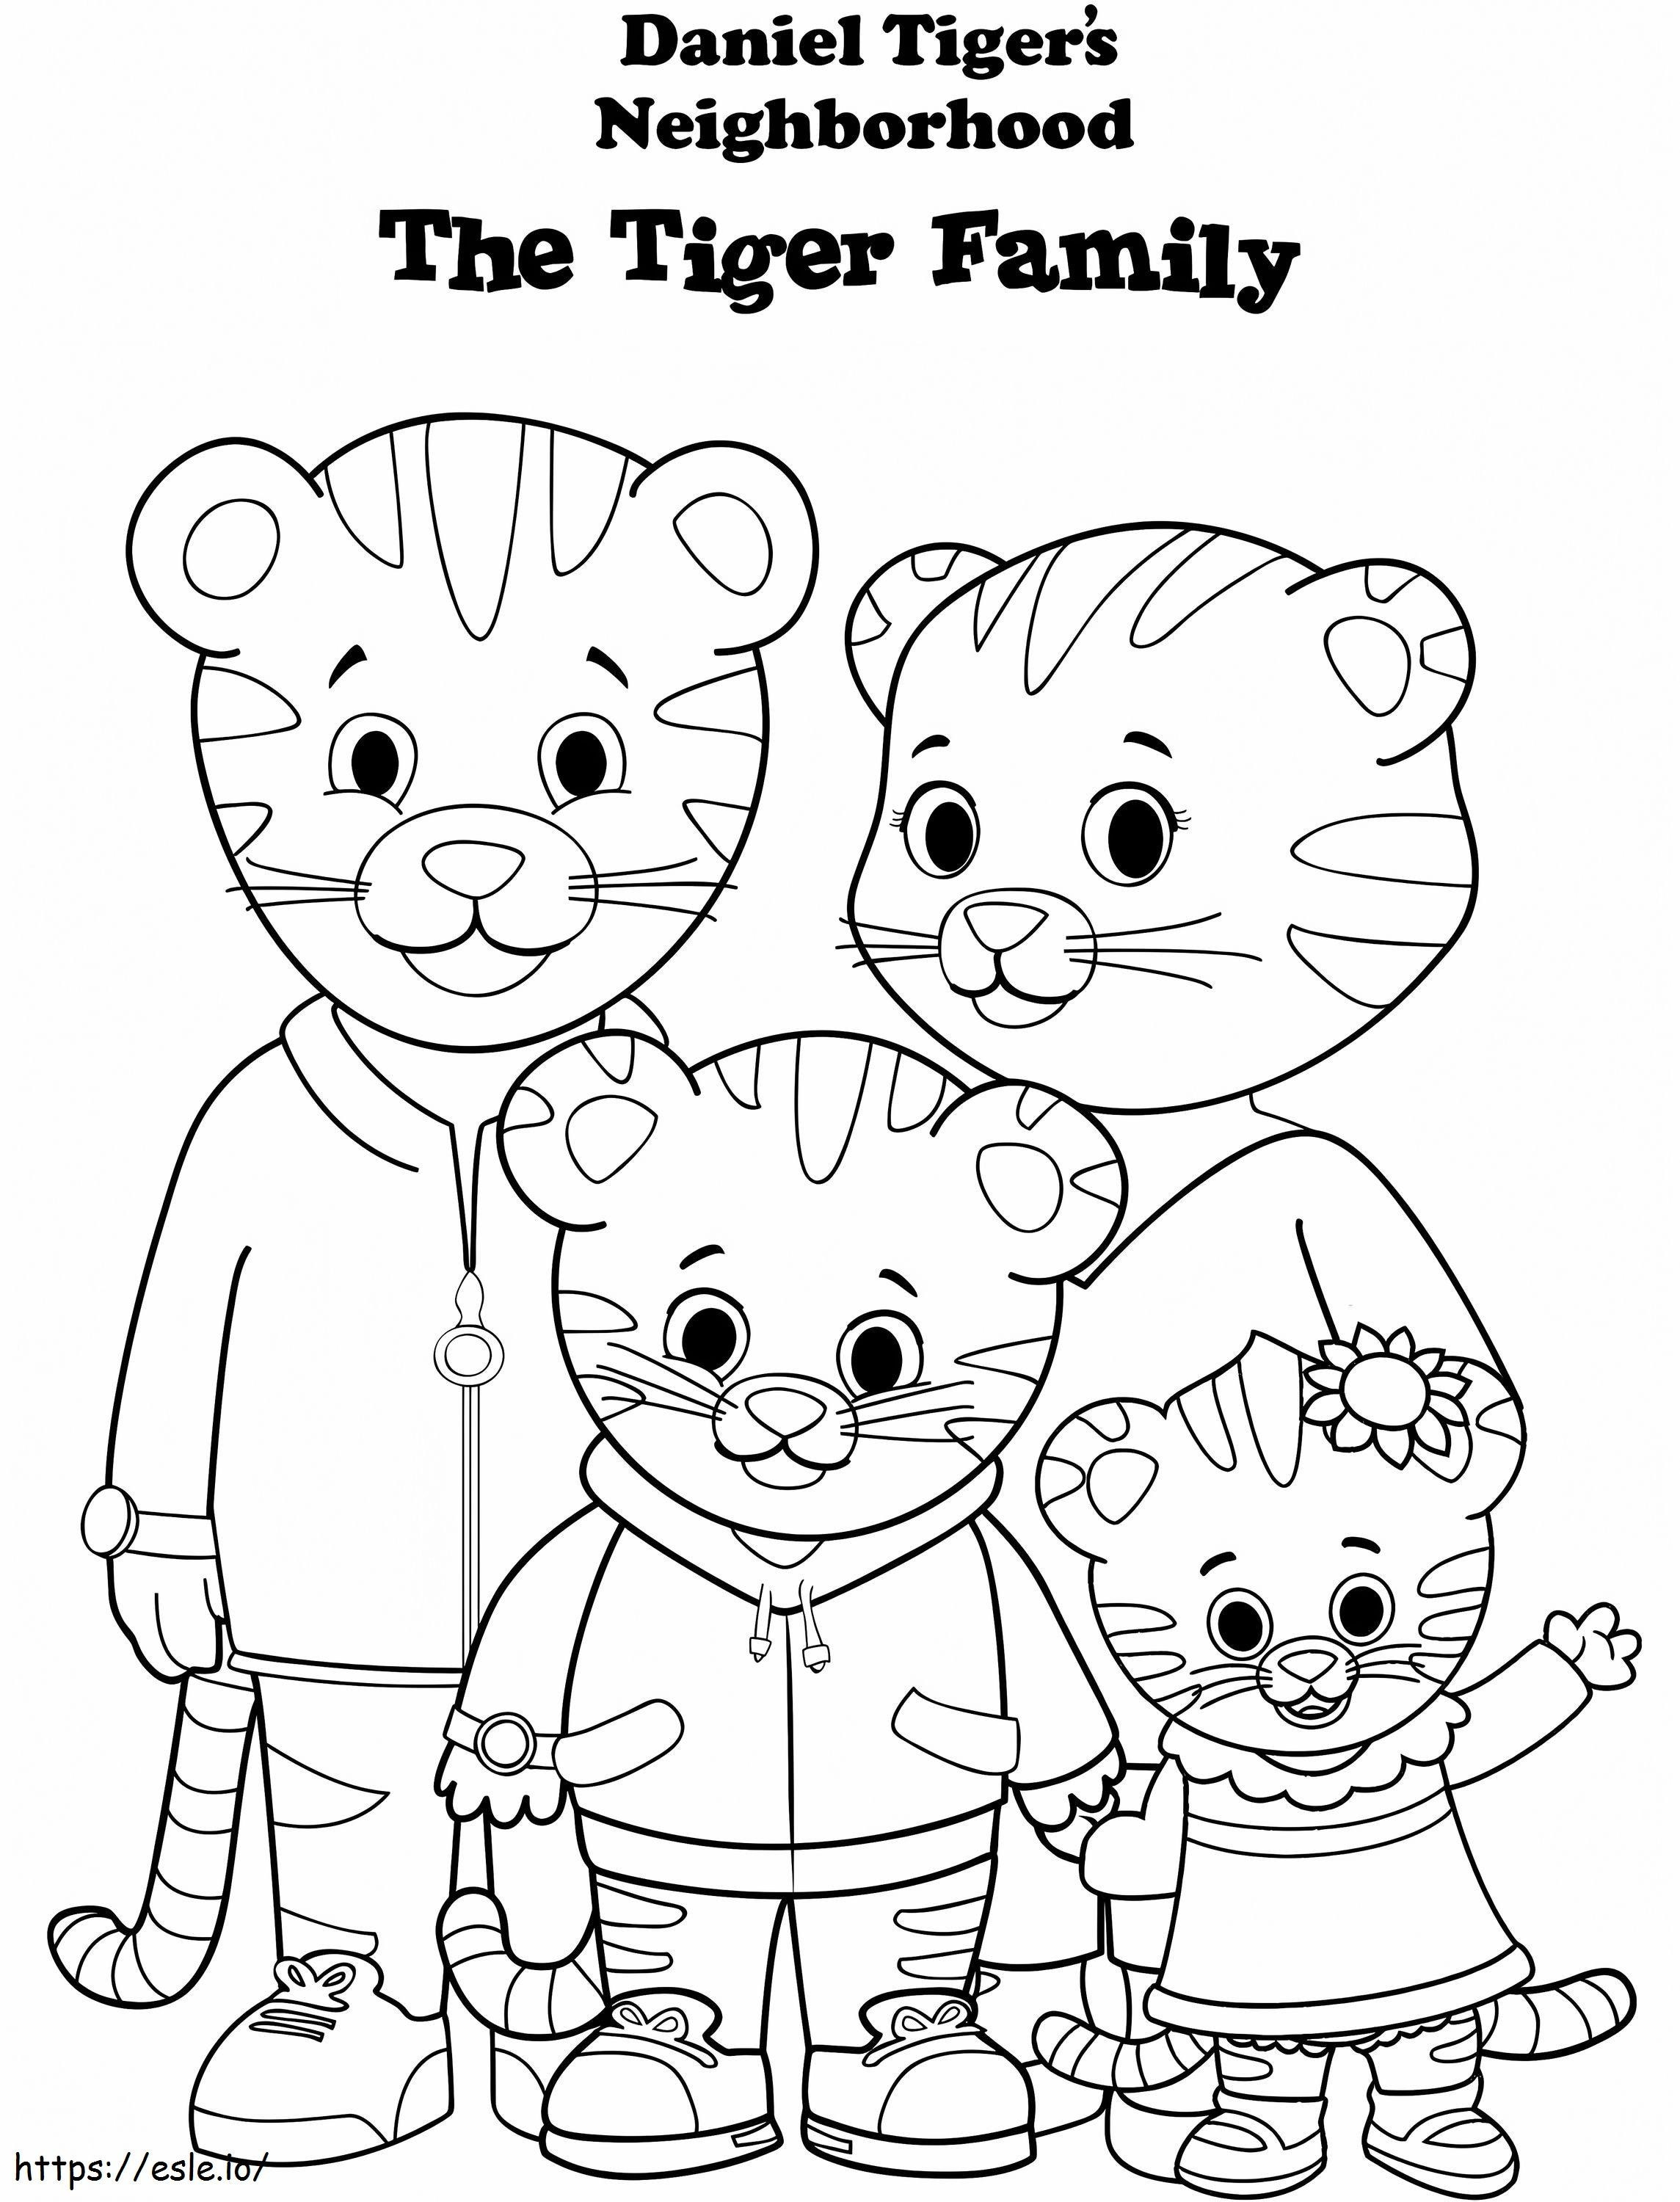 1570118145 Daniel Tiger Family A4 coloring page